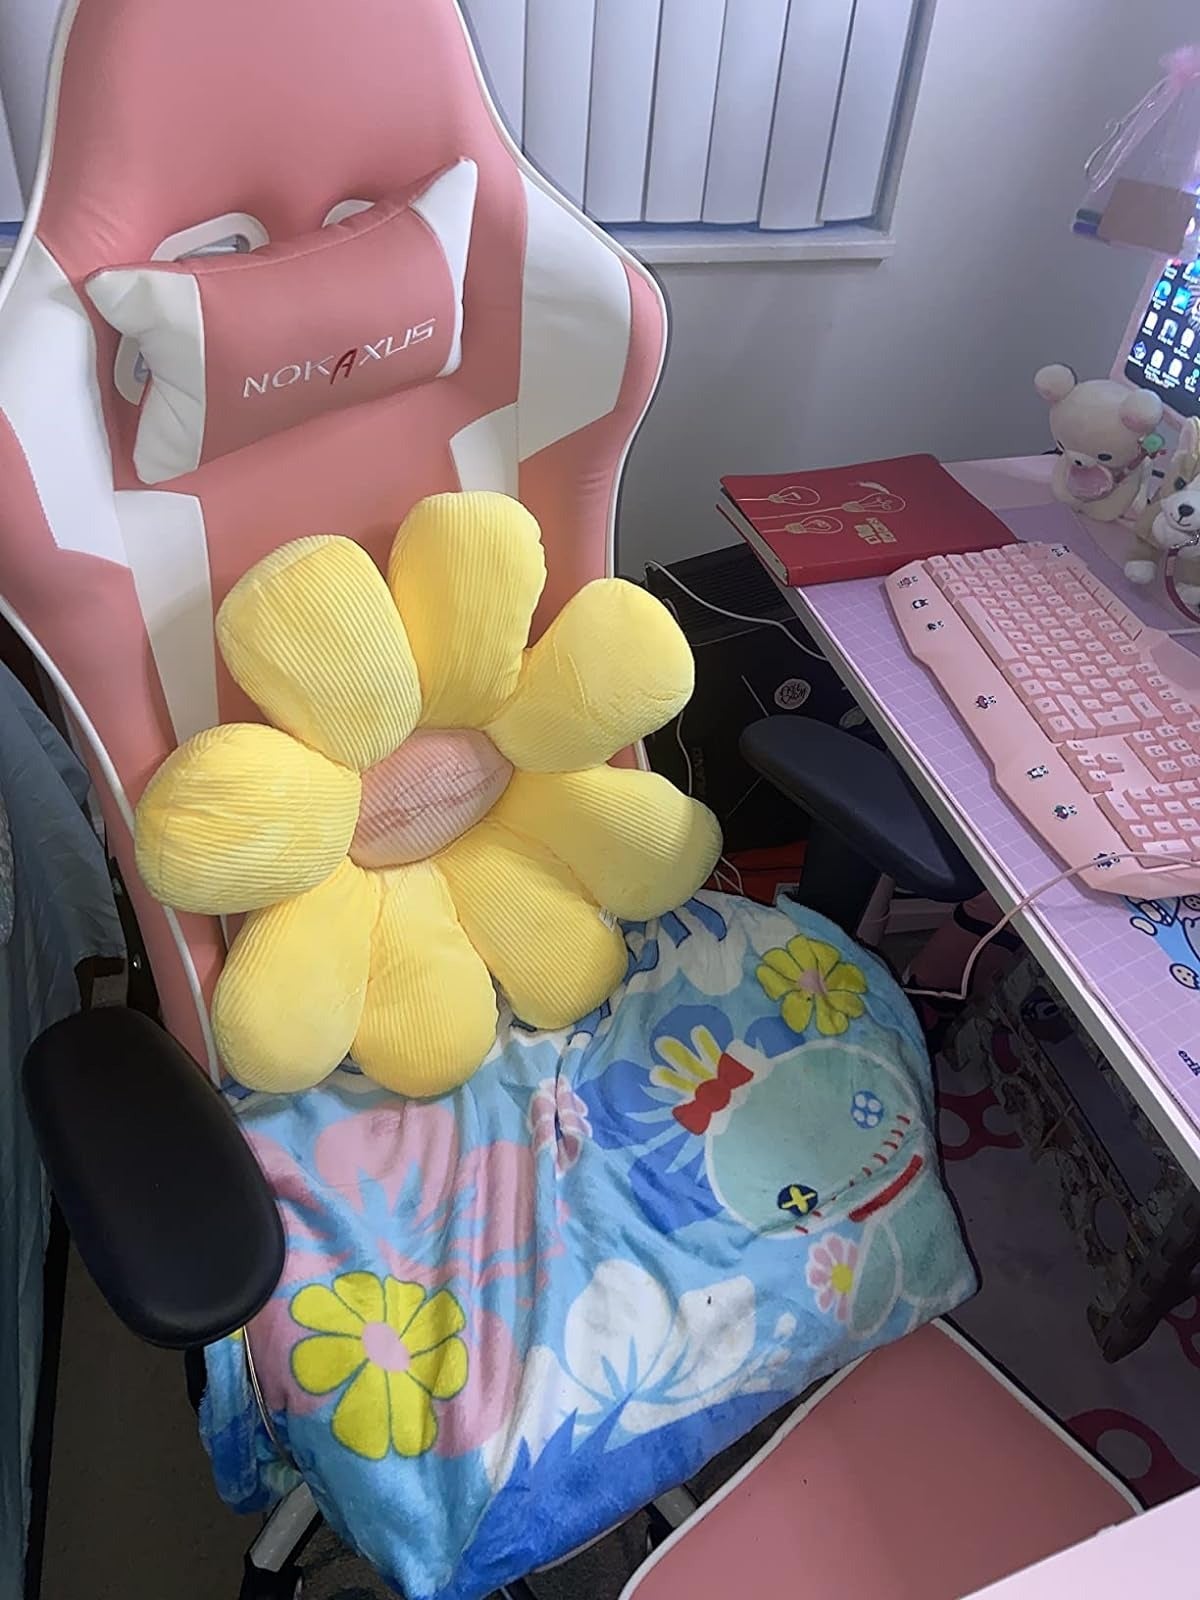 Gaming chair with a large yellow flower pillow and a fleece blanket featuring cartoon birds